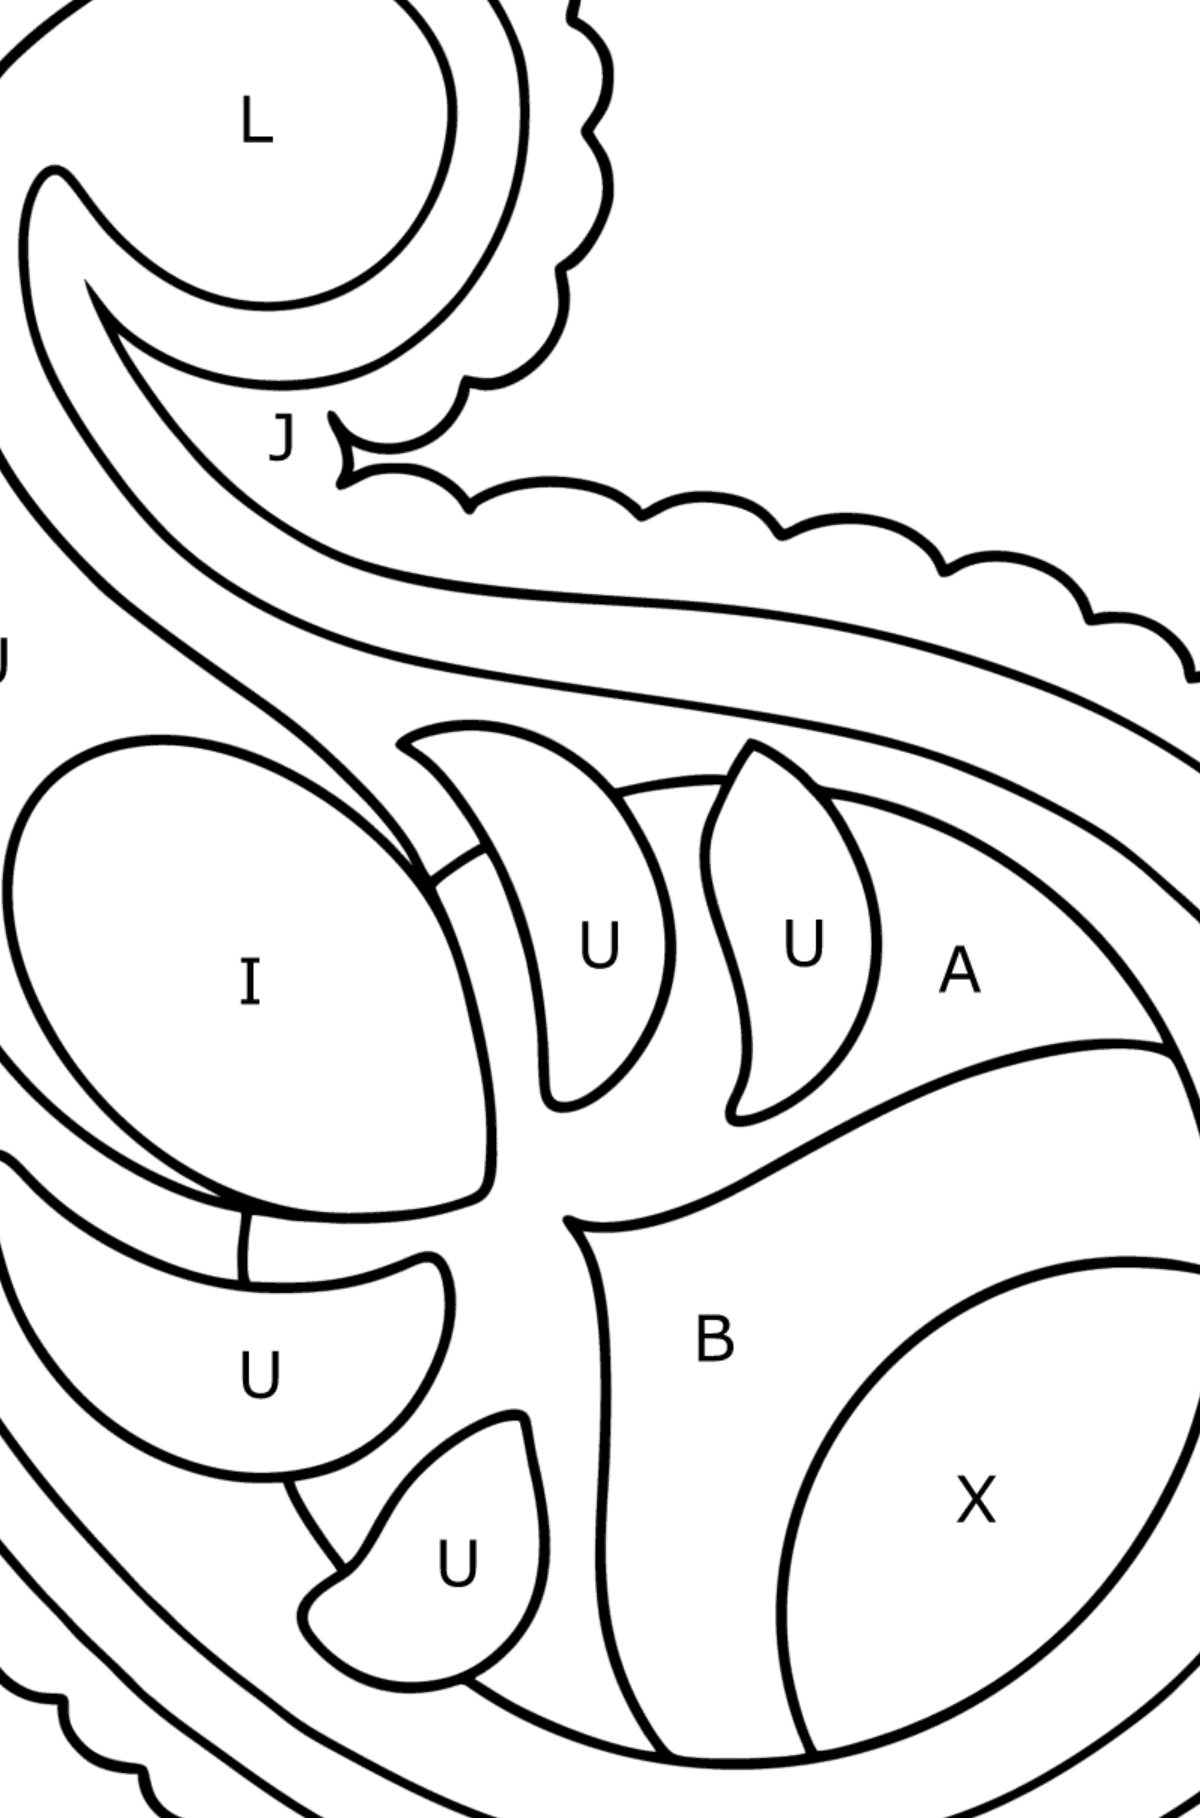 Paisley for Kids coloring page - Coloring by Letters for Kids